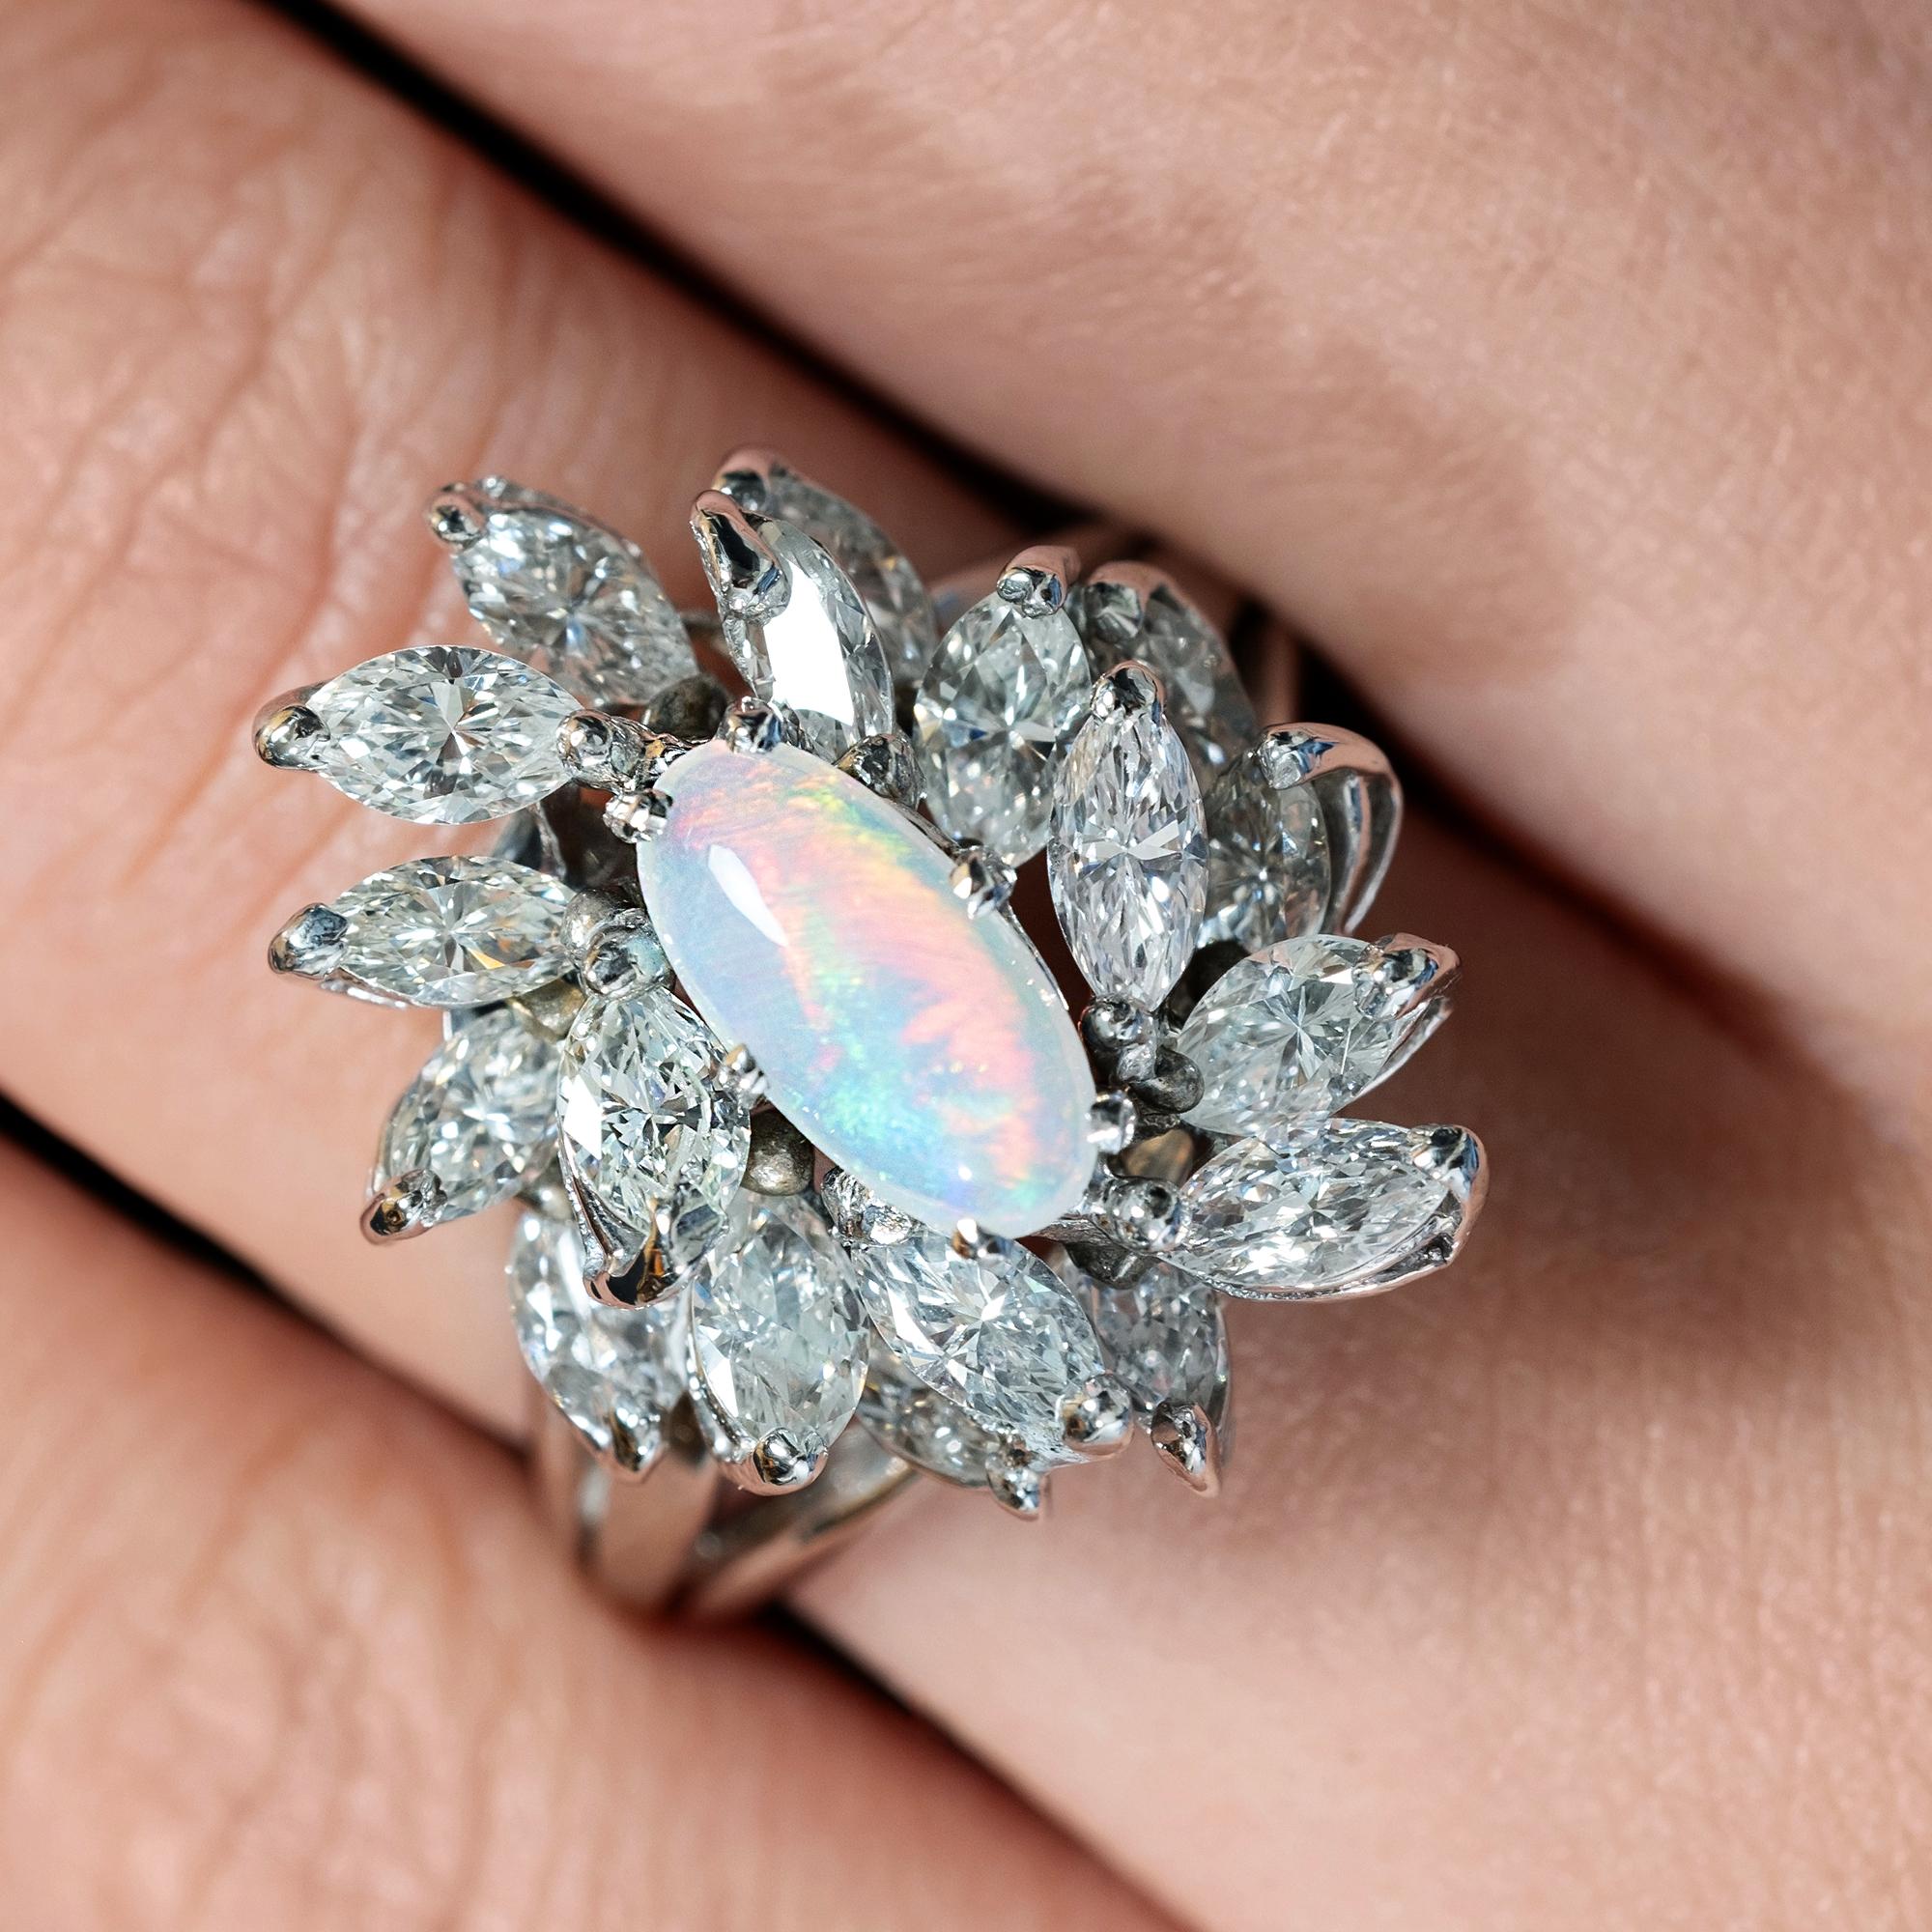 Estate Vintage Ballerina Cluster Platinum Spray Ring with Australian Opal and Diamonds - a Fabulous jewel of Golden Age Hollywood.
The Center is Australian Crystal Opal is Simply Stunning with a Gorgeous Array of All the Colors, measuring